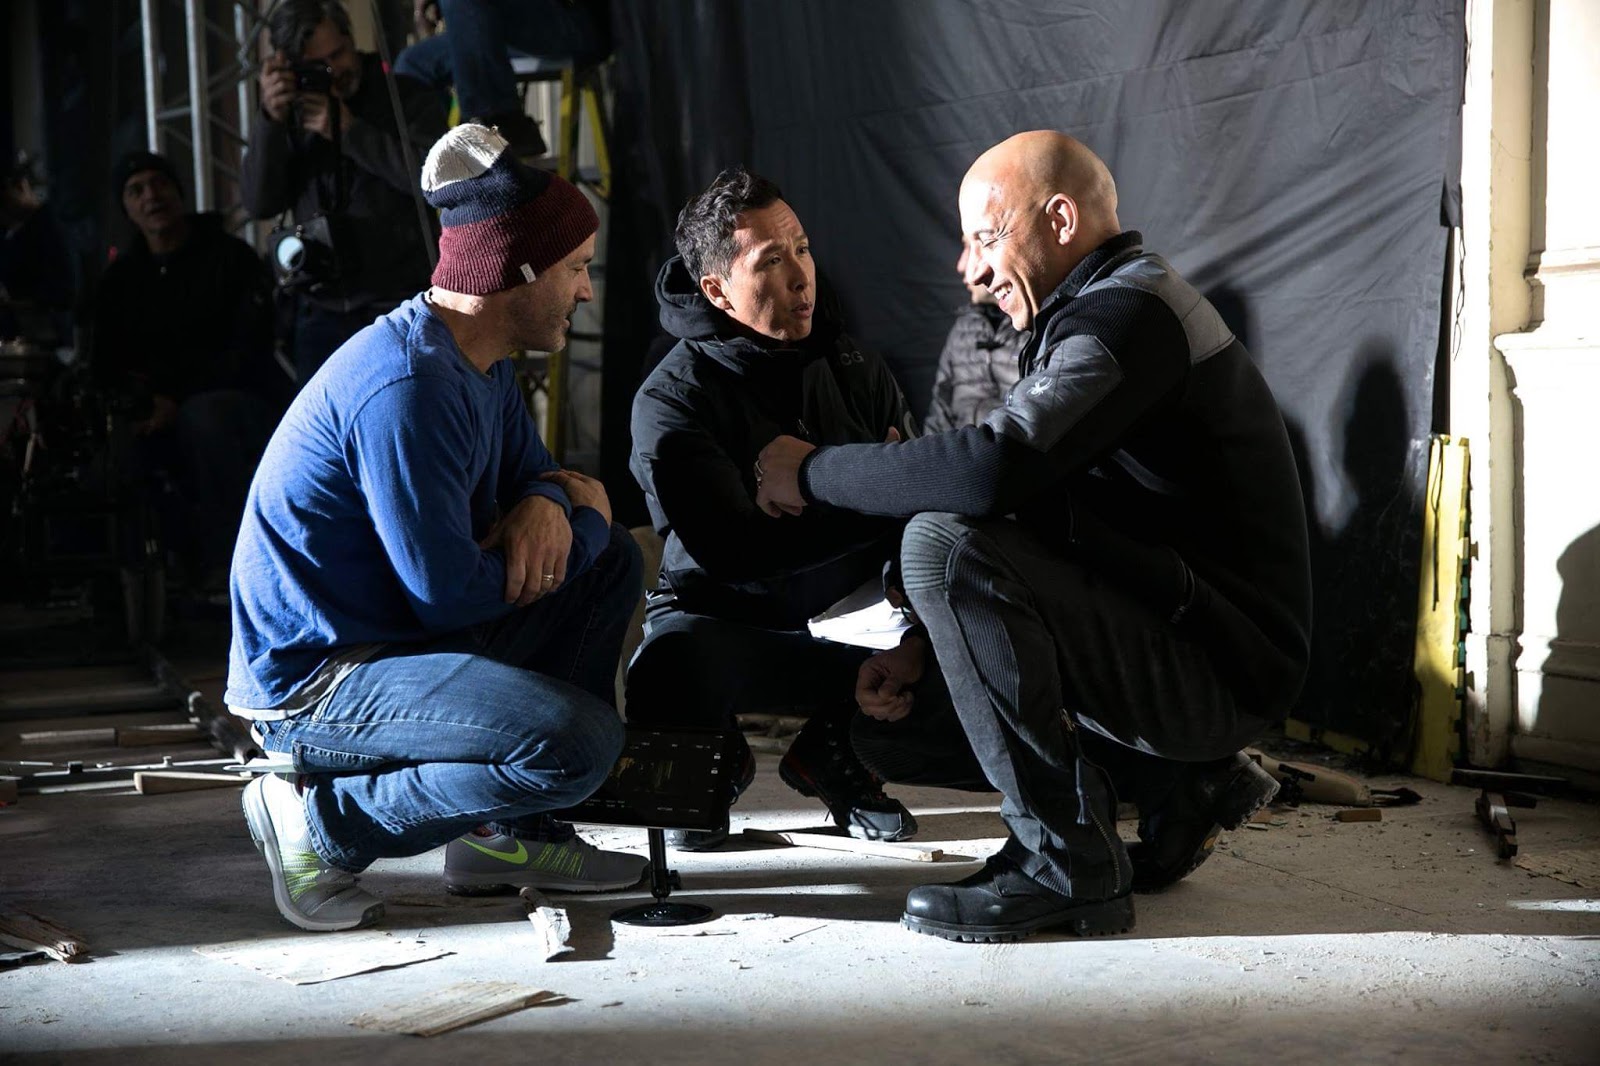 Donnie Yen To Replace Jet Li In The Return Of Xander Cage